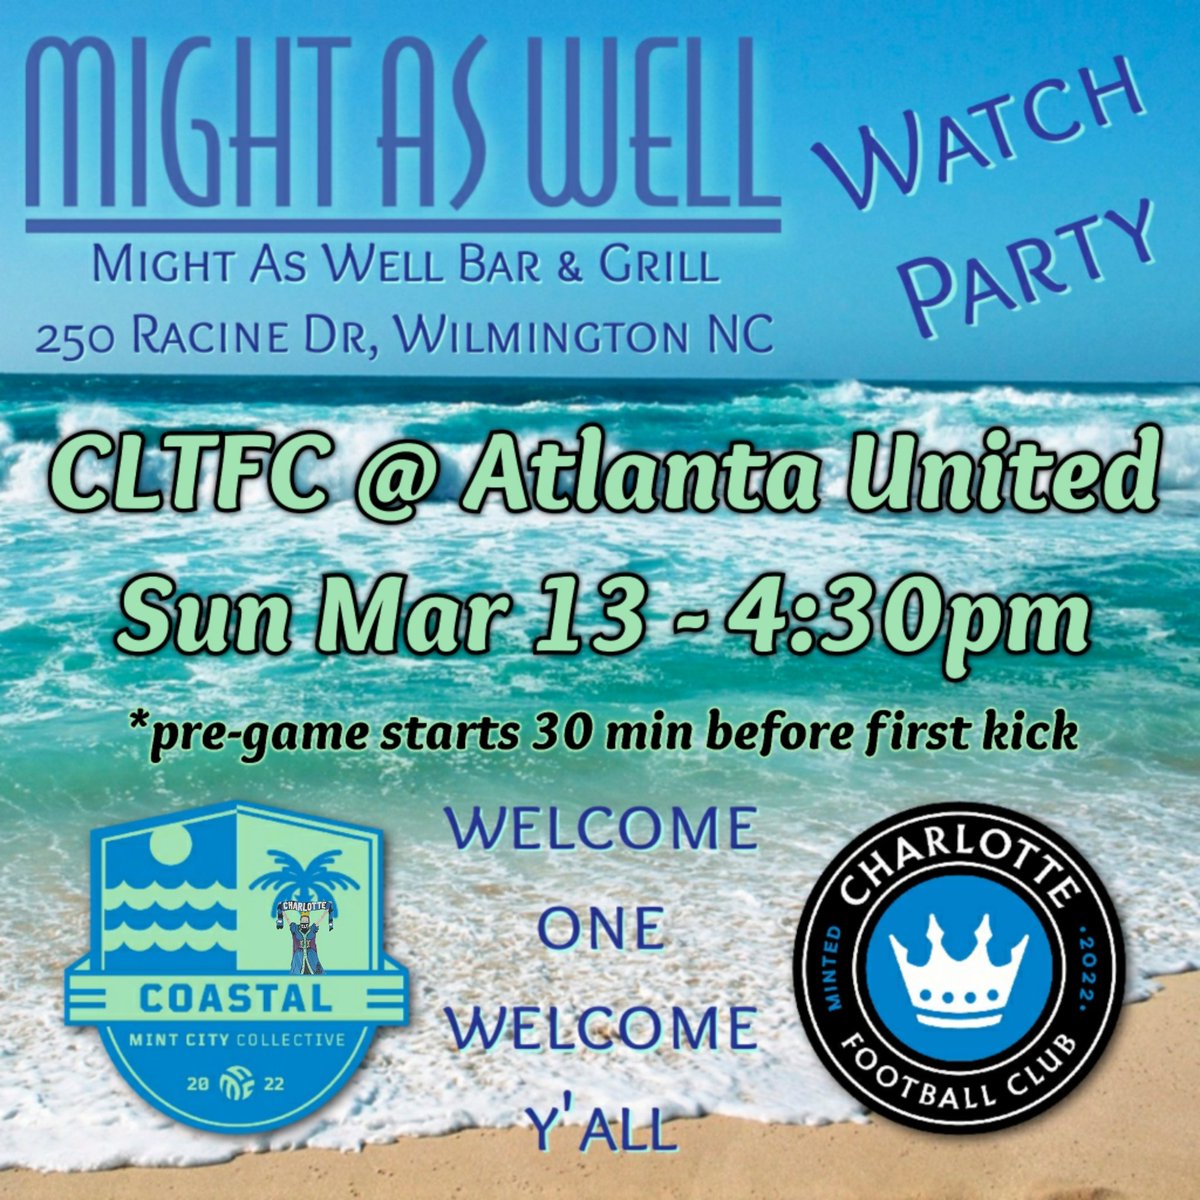 come join @MCCcoastal at @MAWBAR in #Wilmington to watch @charlottefc in their first match-up of what will surely become a heated local rivalry with @ATLUTD ... 
#charlottefc #ForTheCrown @mintcitycoll #supportersgroup #welcomeonewelcomeyall #mightaswell #watchparty